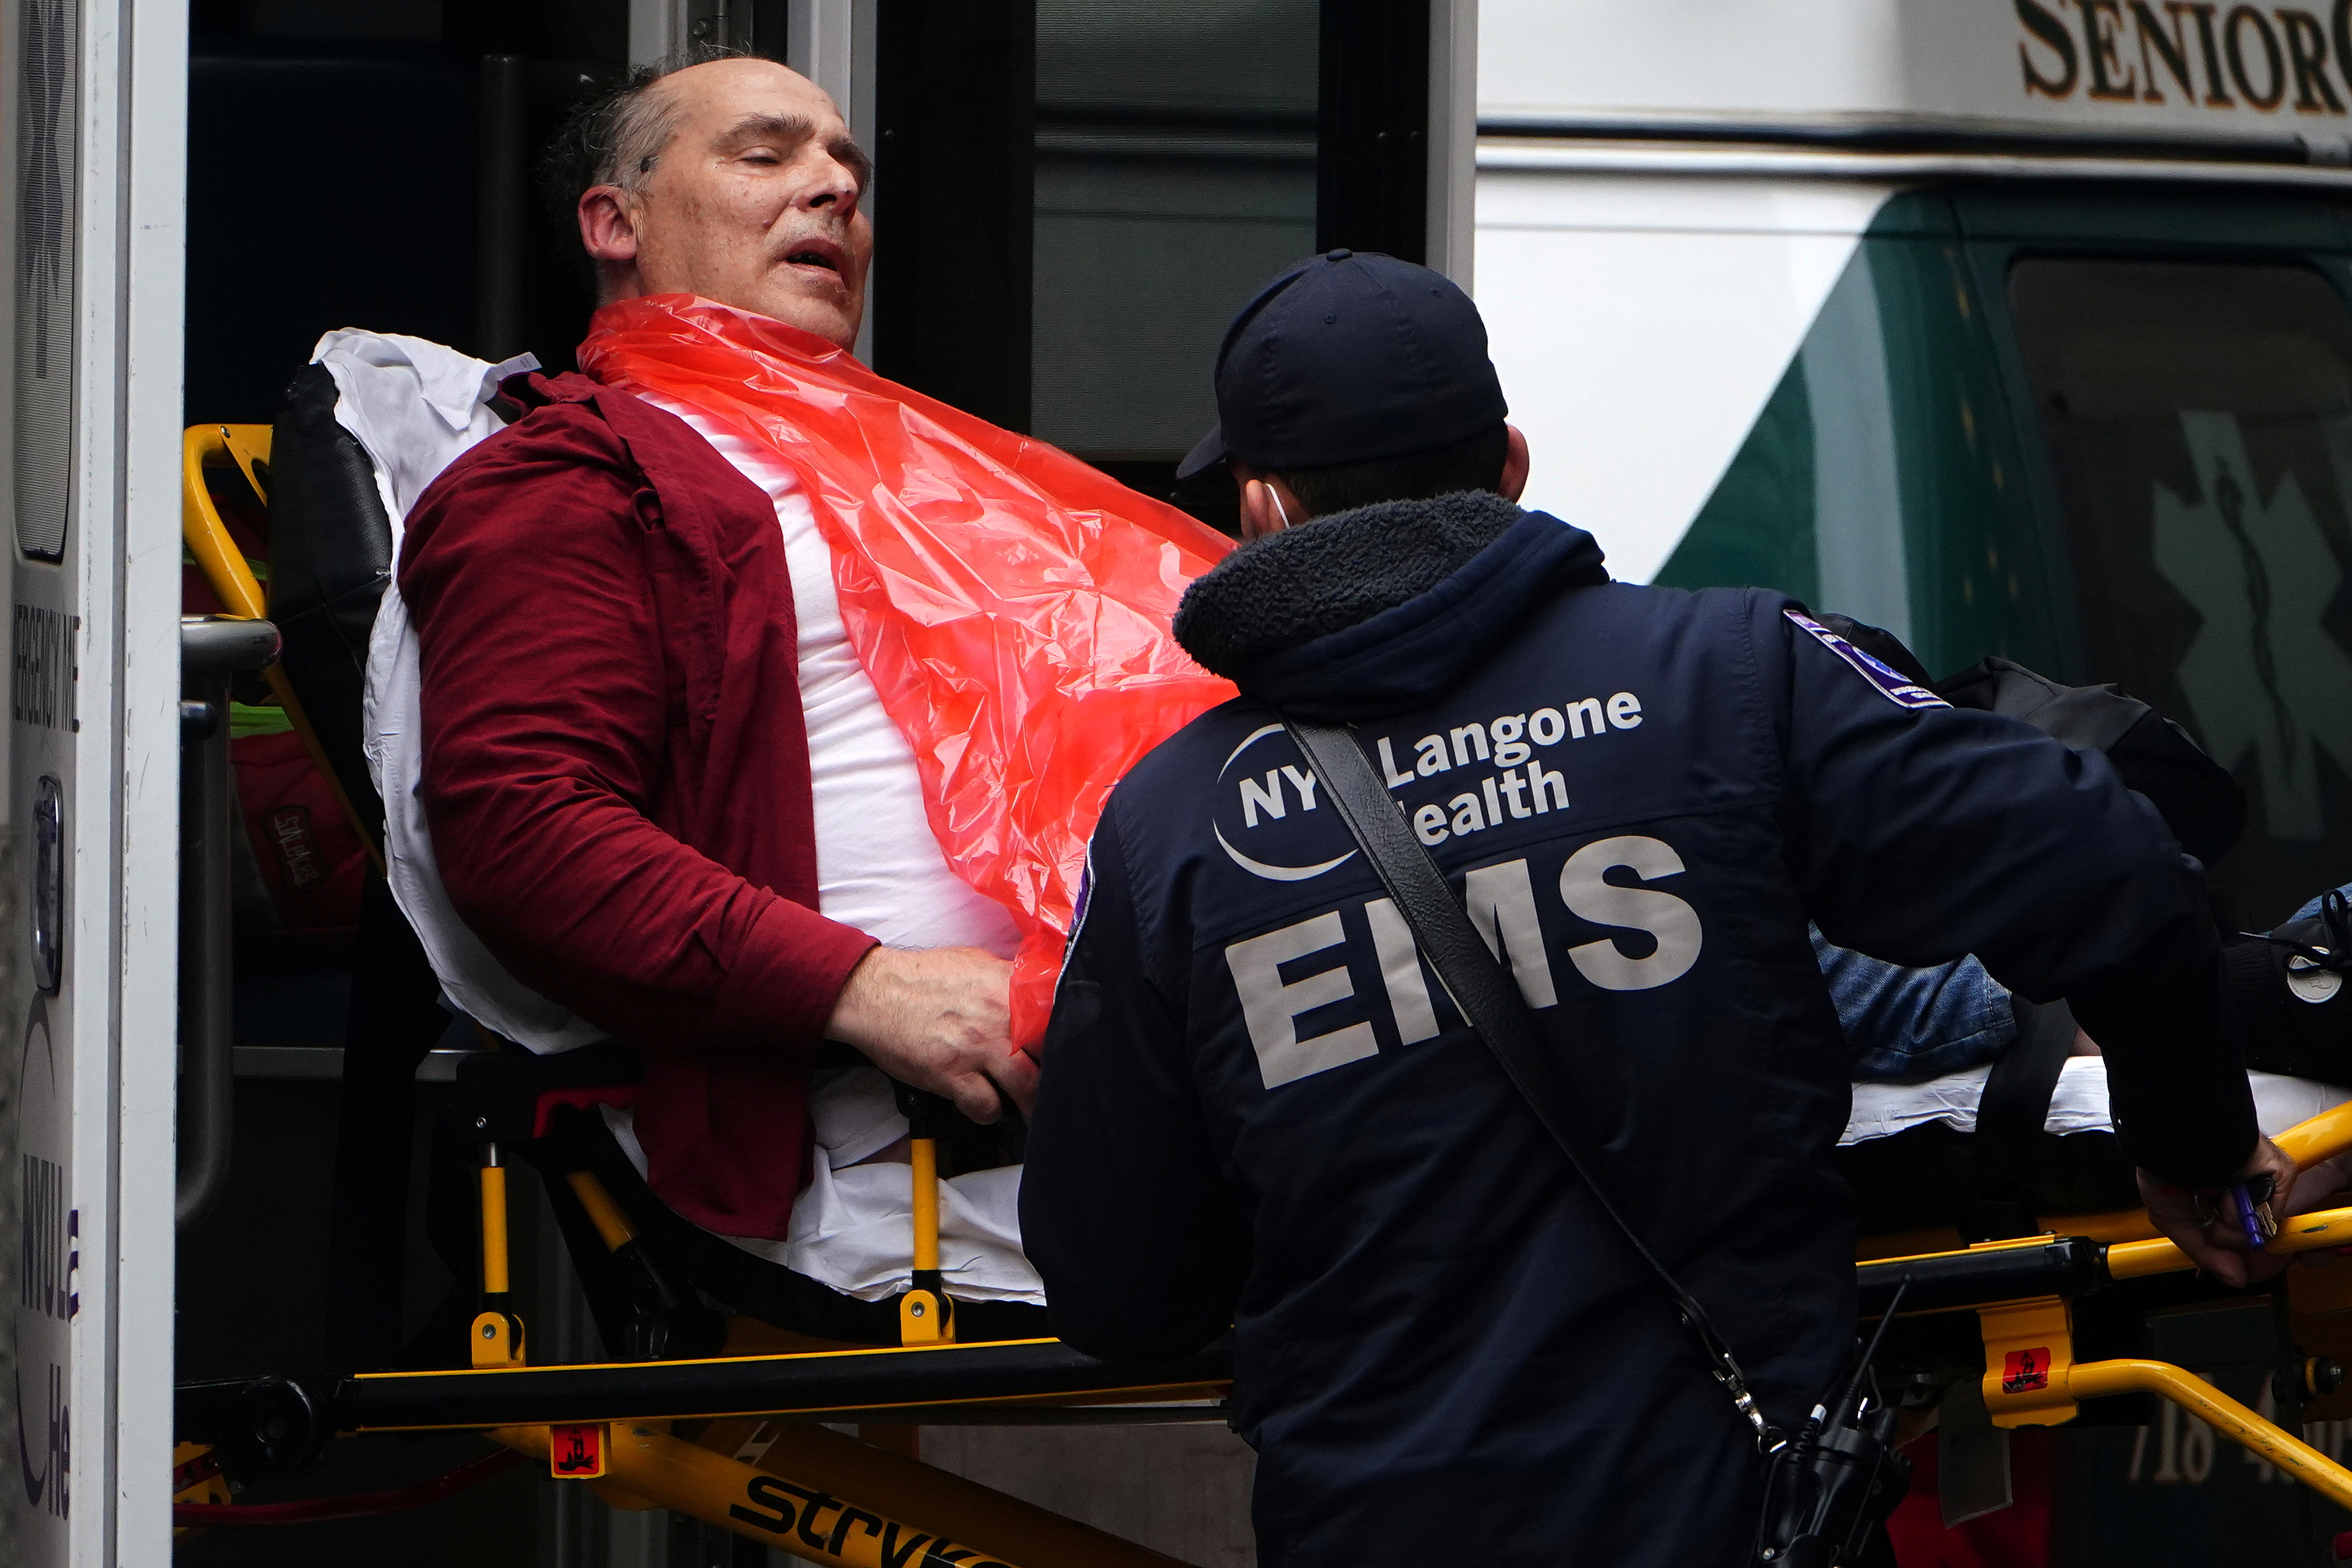 A man is brought to hospital on a stretcher in New York